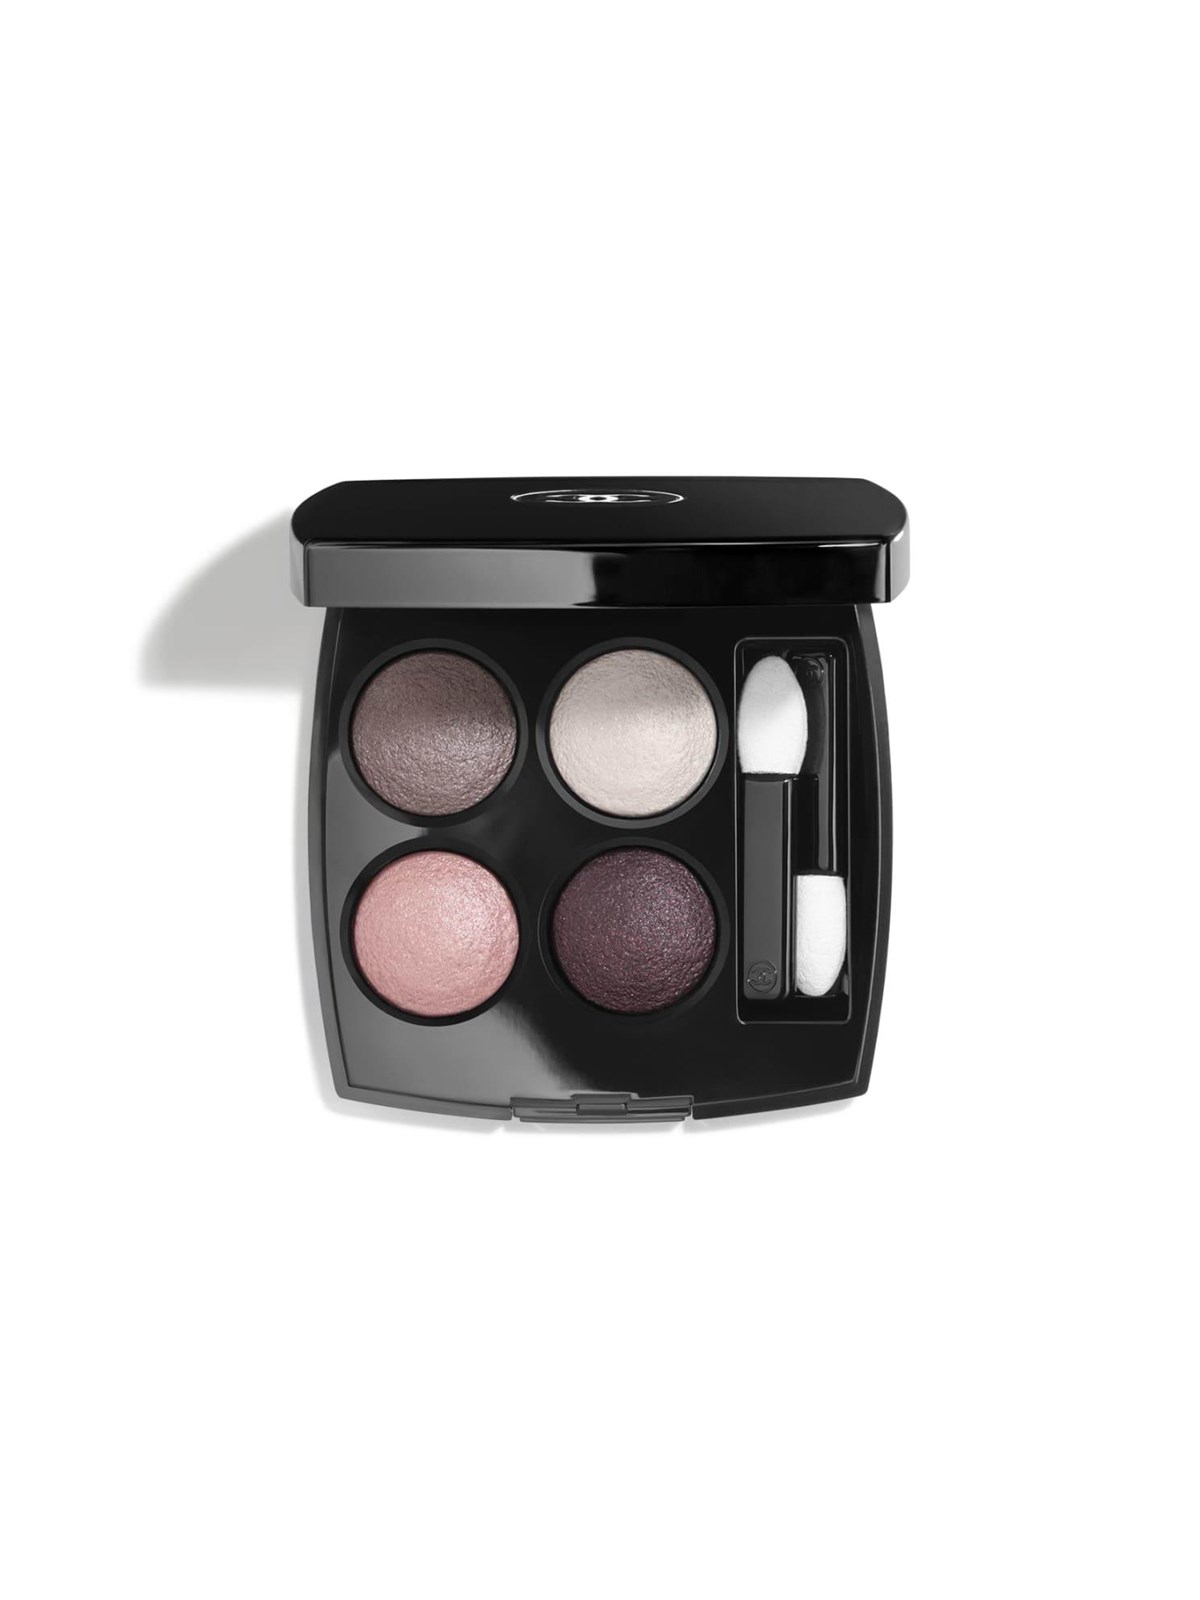 Chanel Les 4 Ombres eye shadow 202 Tisse Camelia